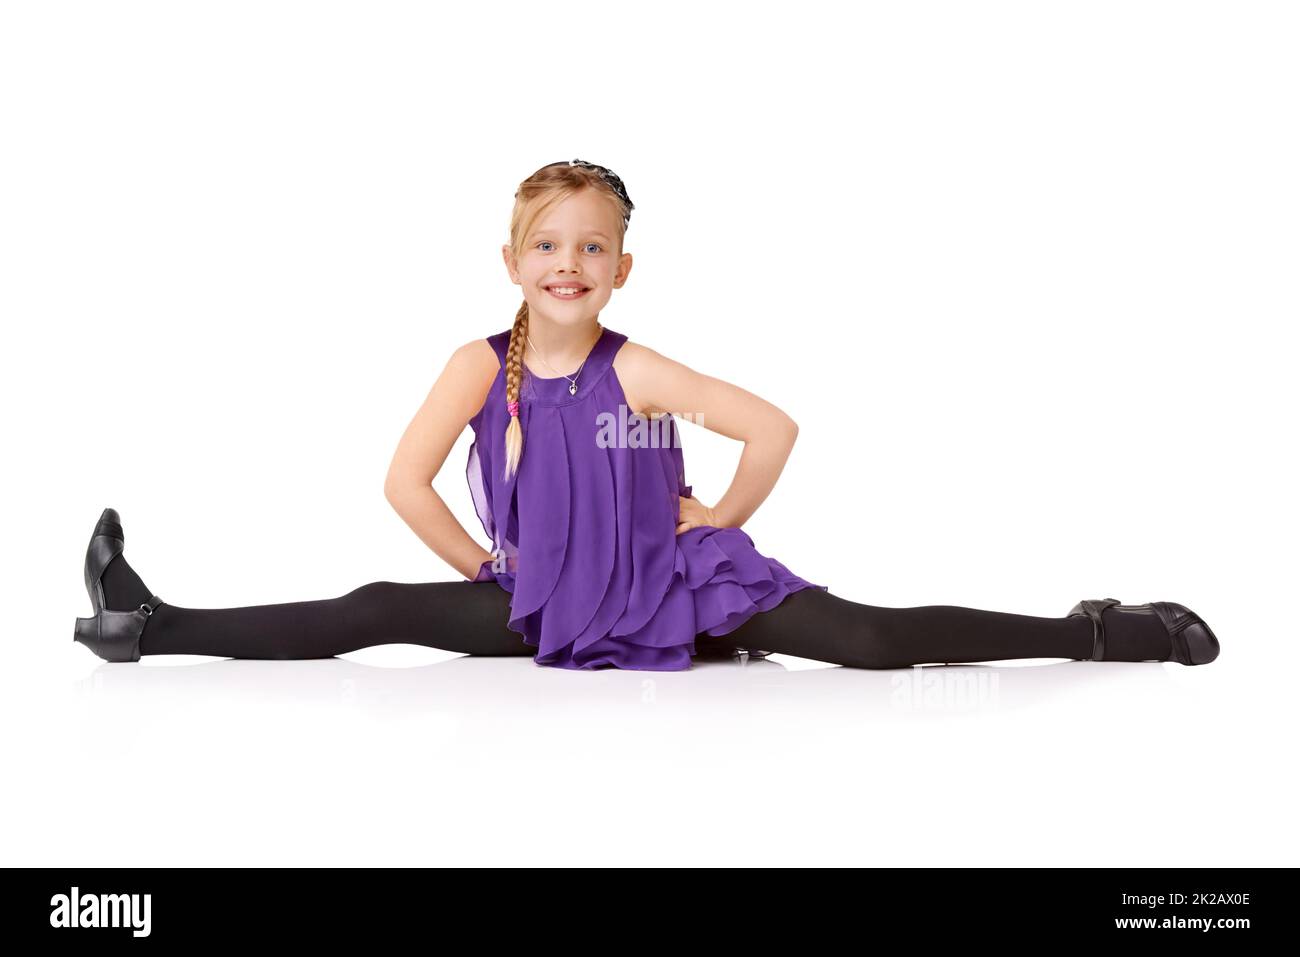 Cute little girl doing splits Cut Out Stock Images & Pictures - Alamy